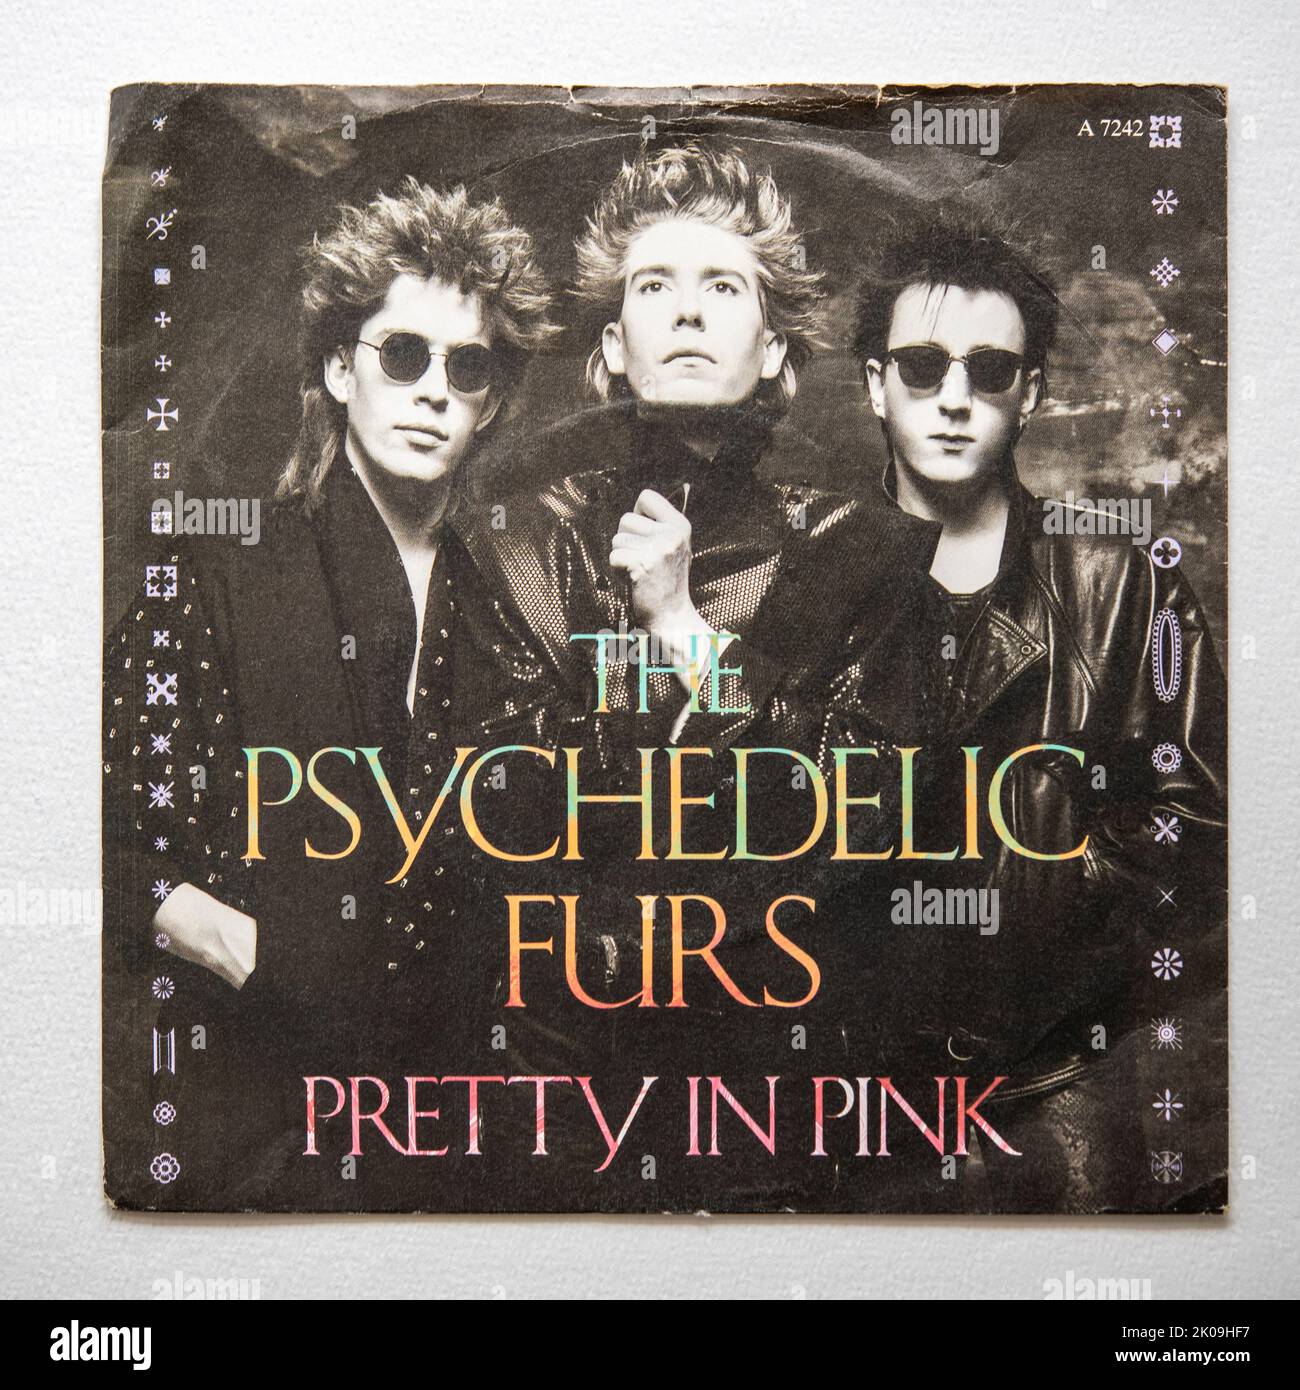 Picture cover of the seven inch single version of Pretty in Pink by The Psychedelic Furs, which was released in 1986. Stock Photo